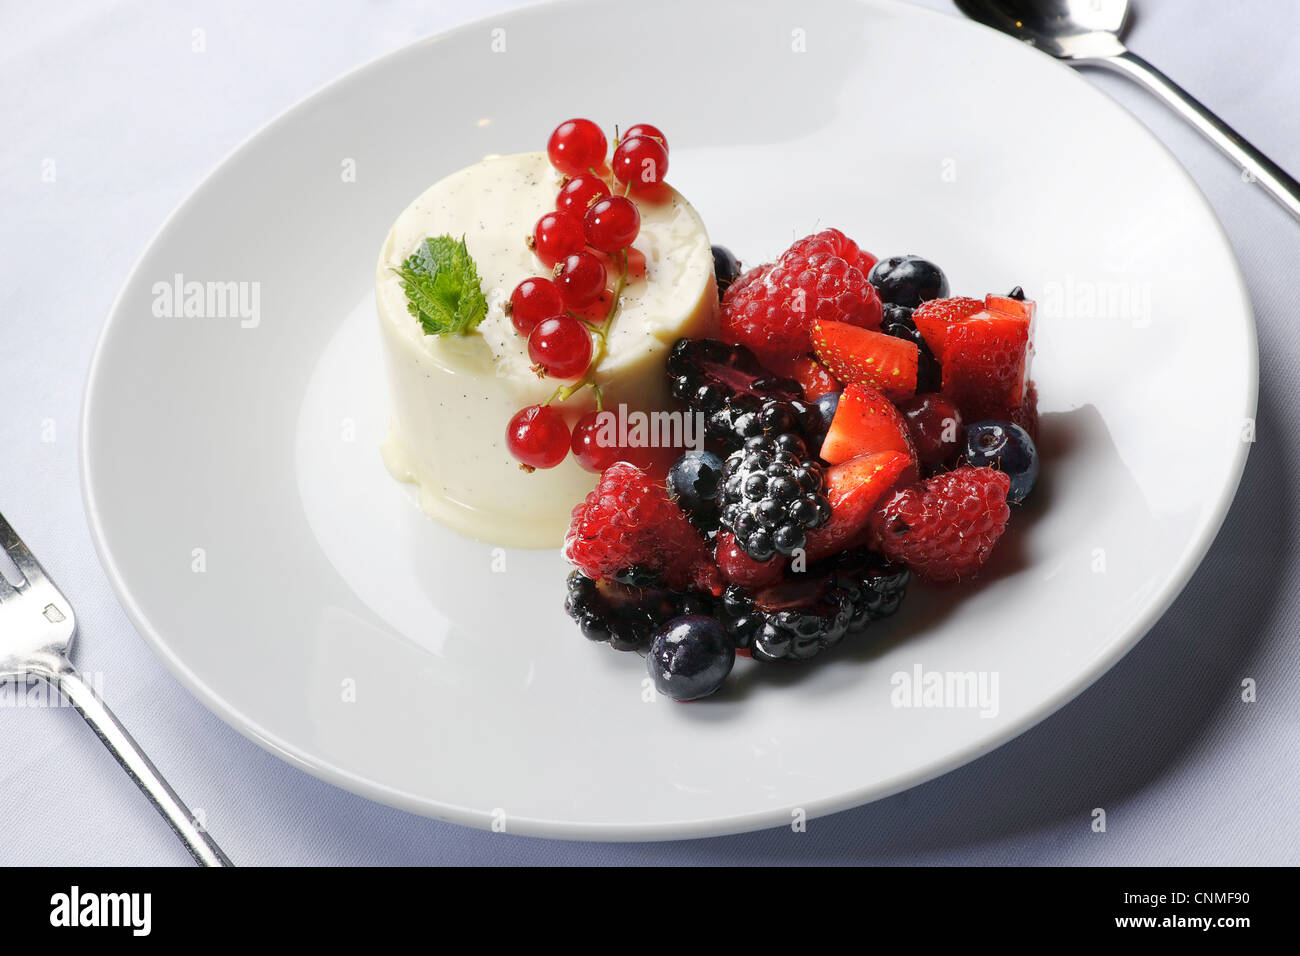 fruit pudding dessert blackberry, blueberry, raspberry red currants and strawberries on white tablecloth on restaurant table Stock Photo